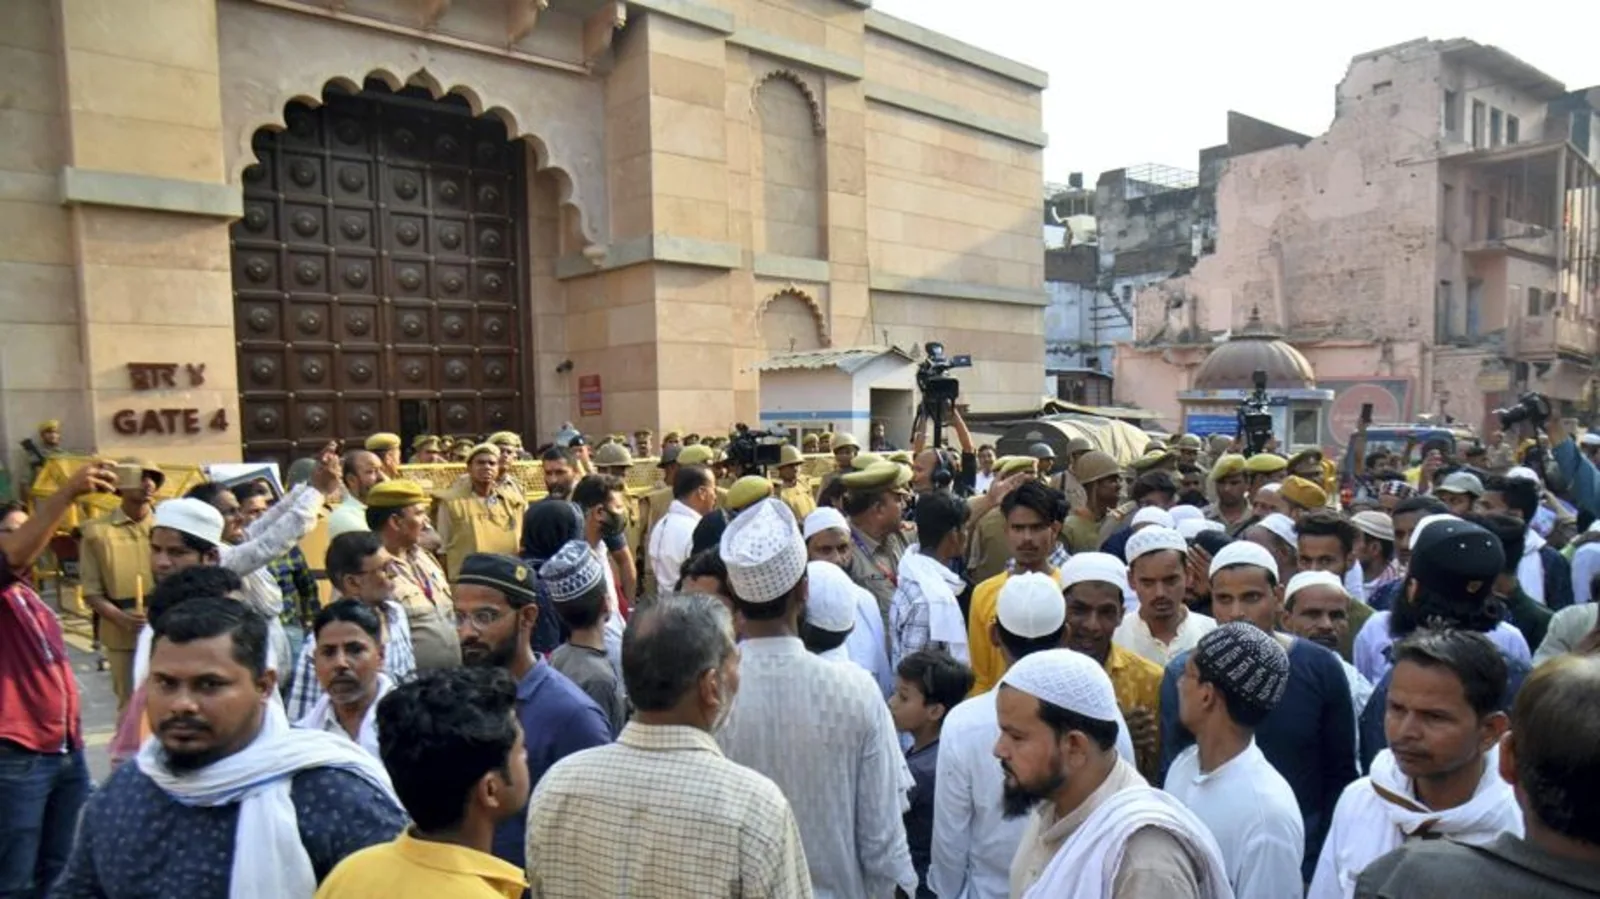 Supreme Court to hear plea on Gyanvapi mosque row in UP tomorrow; survey ends